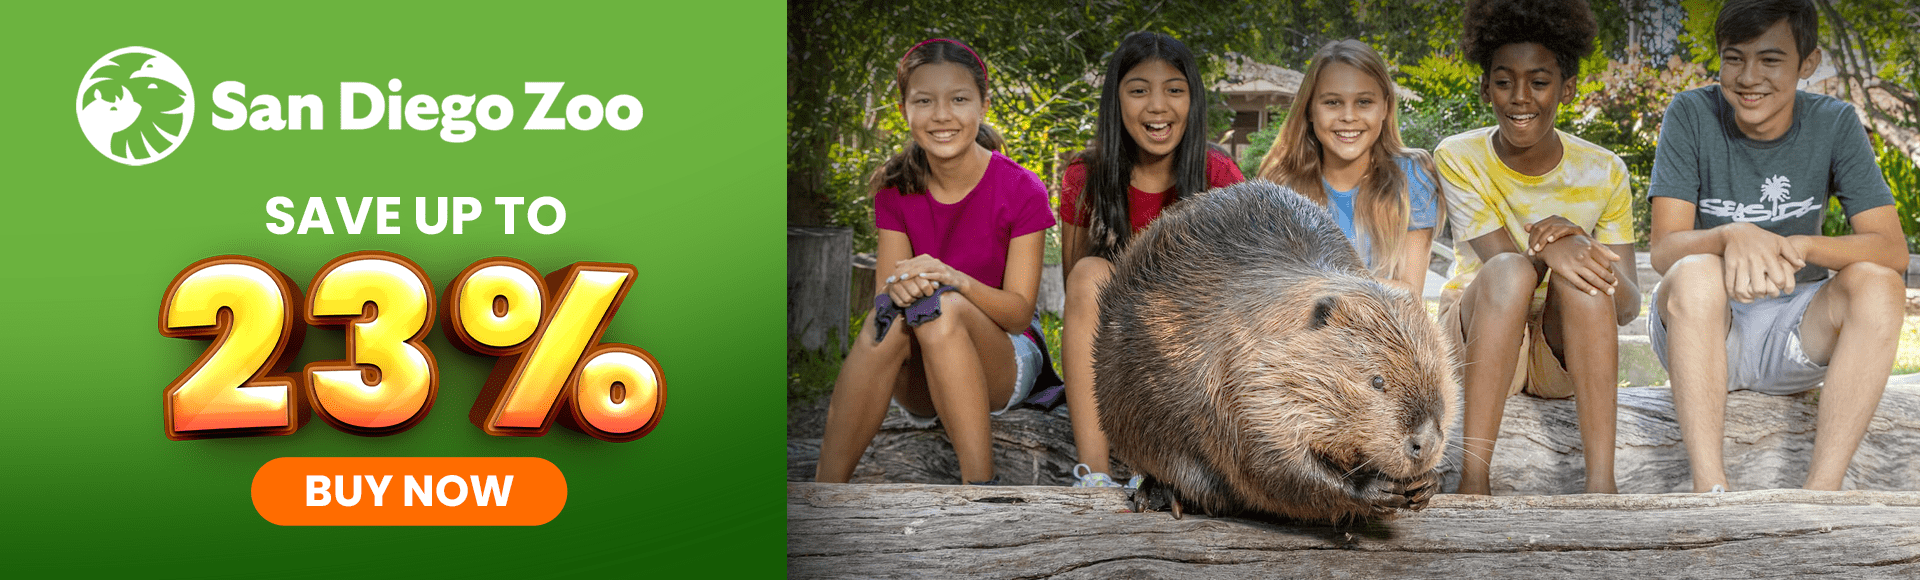 San Diego Zoo Discounted Tickets